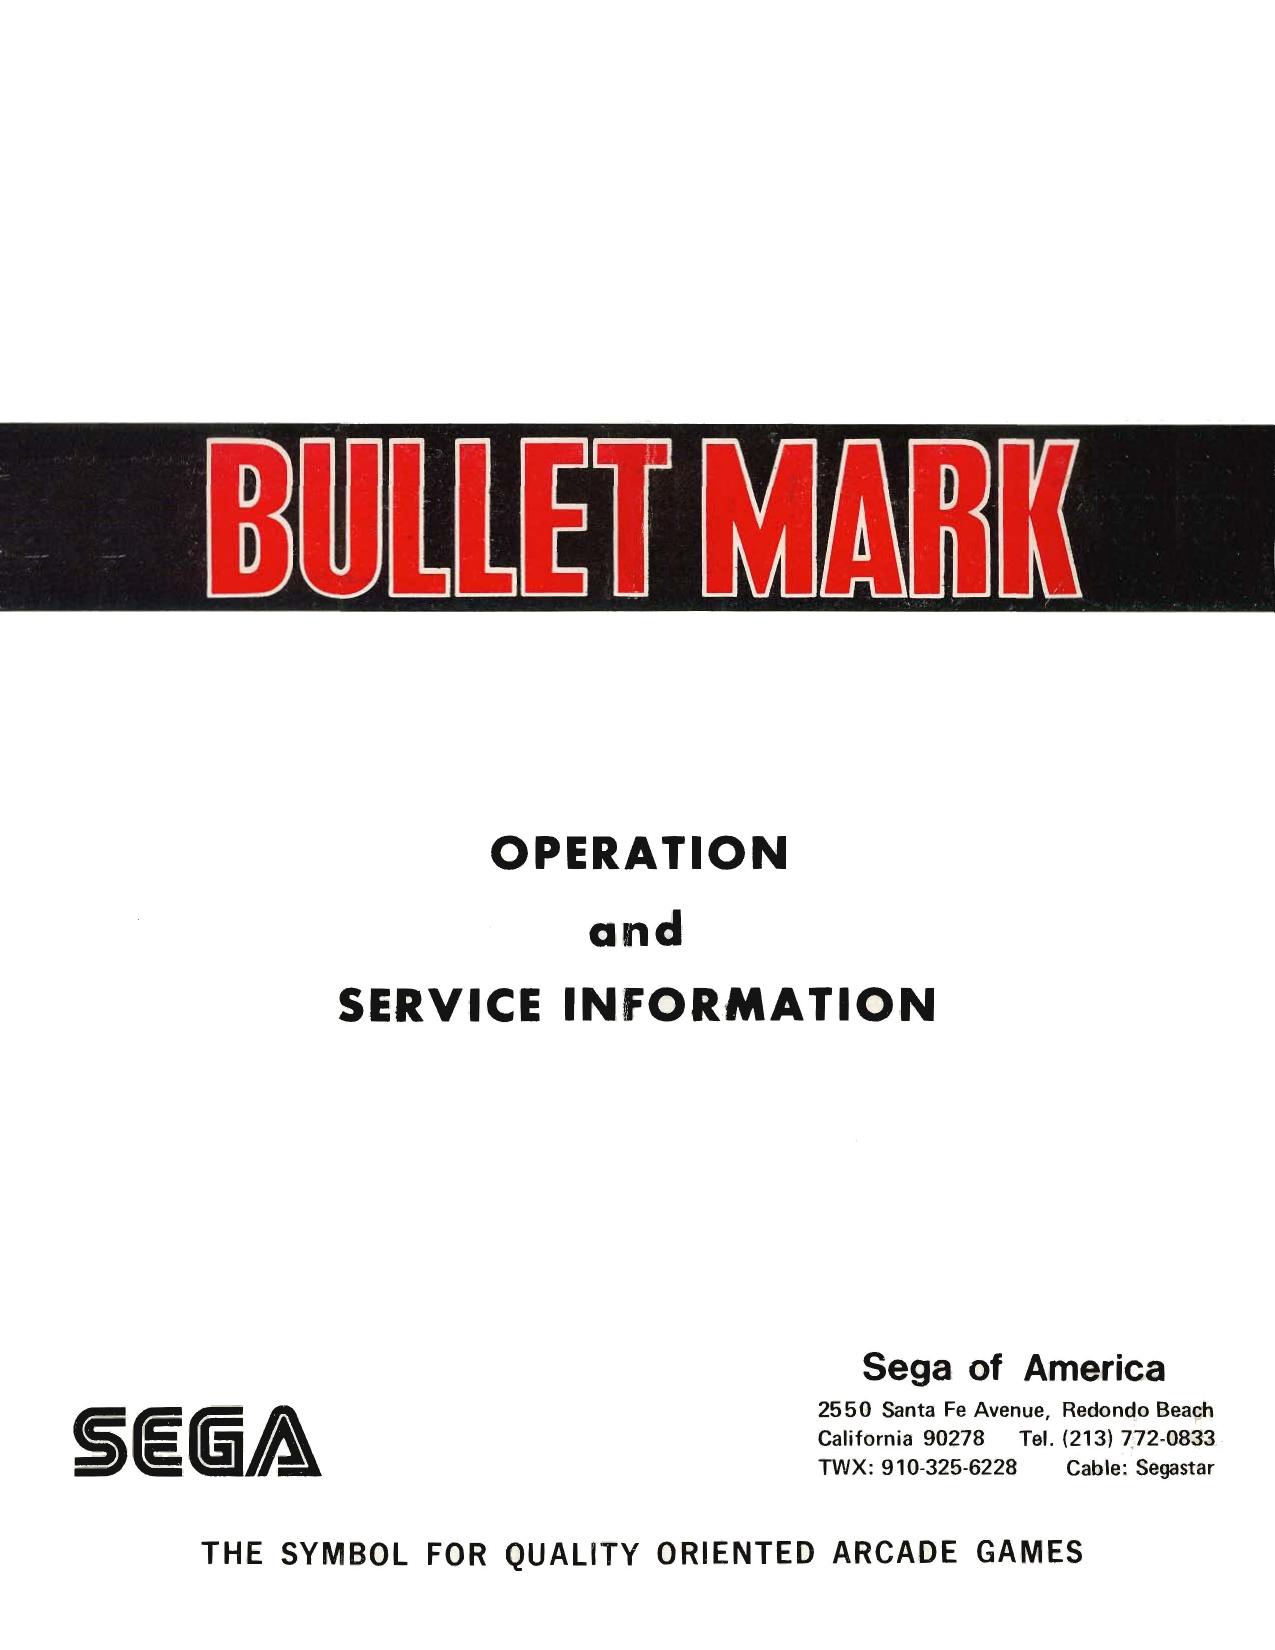 Bullet Mark (Missing Pages 7 & 9)